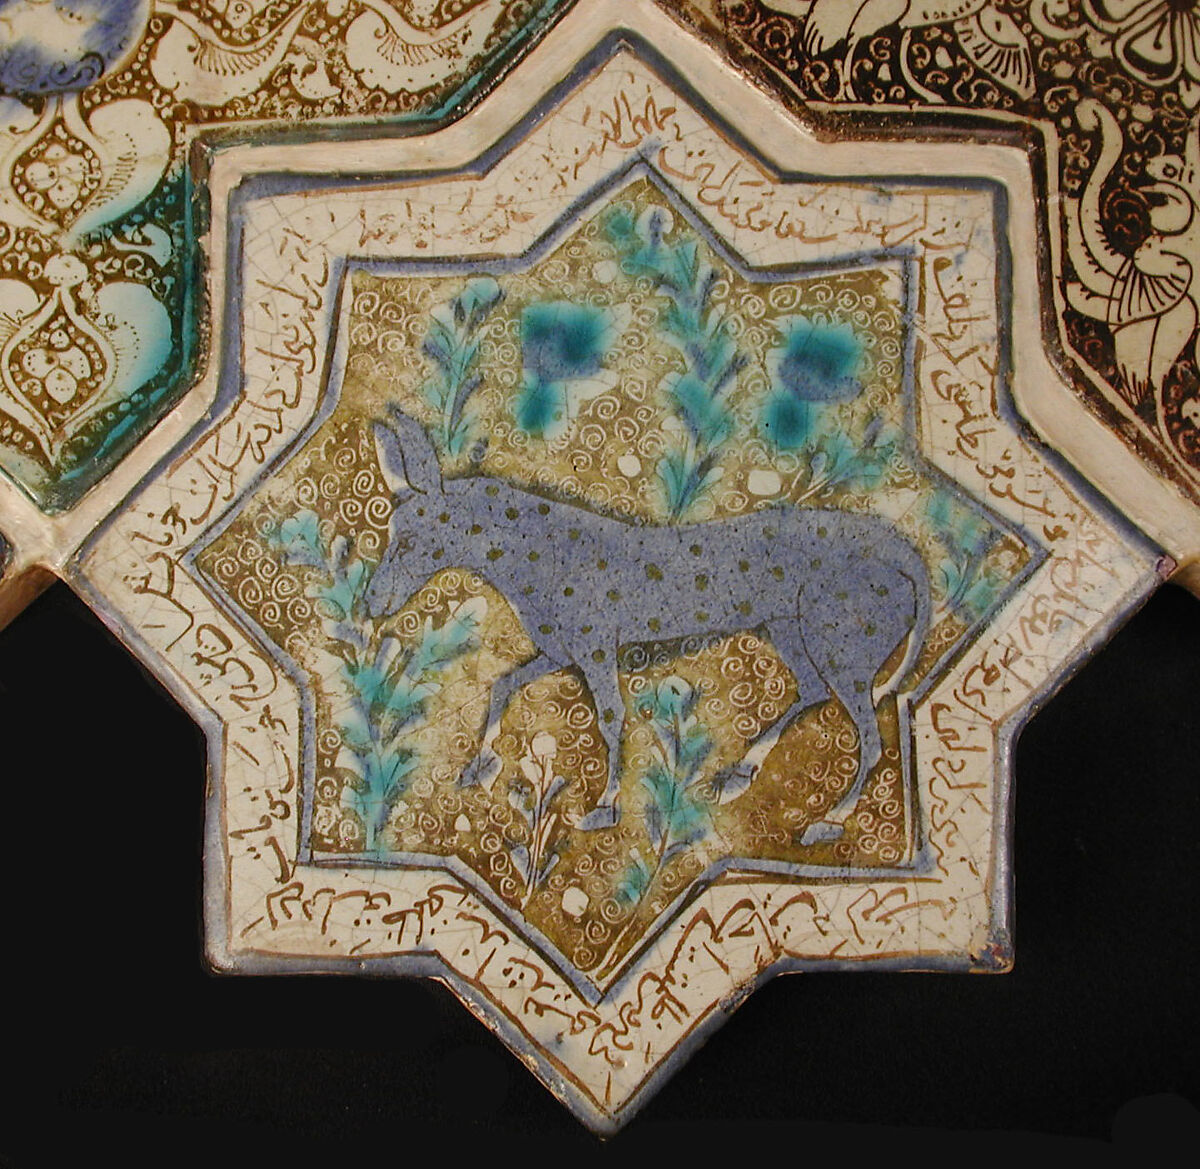 Star-Shaped Tile, Stonepaste; inglaze painted in blue and turquoise and luster-painted on opaque white glaze 